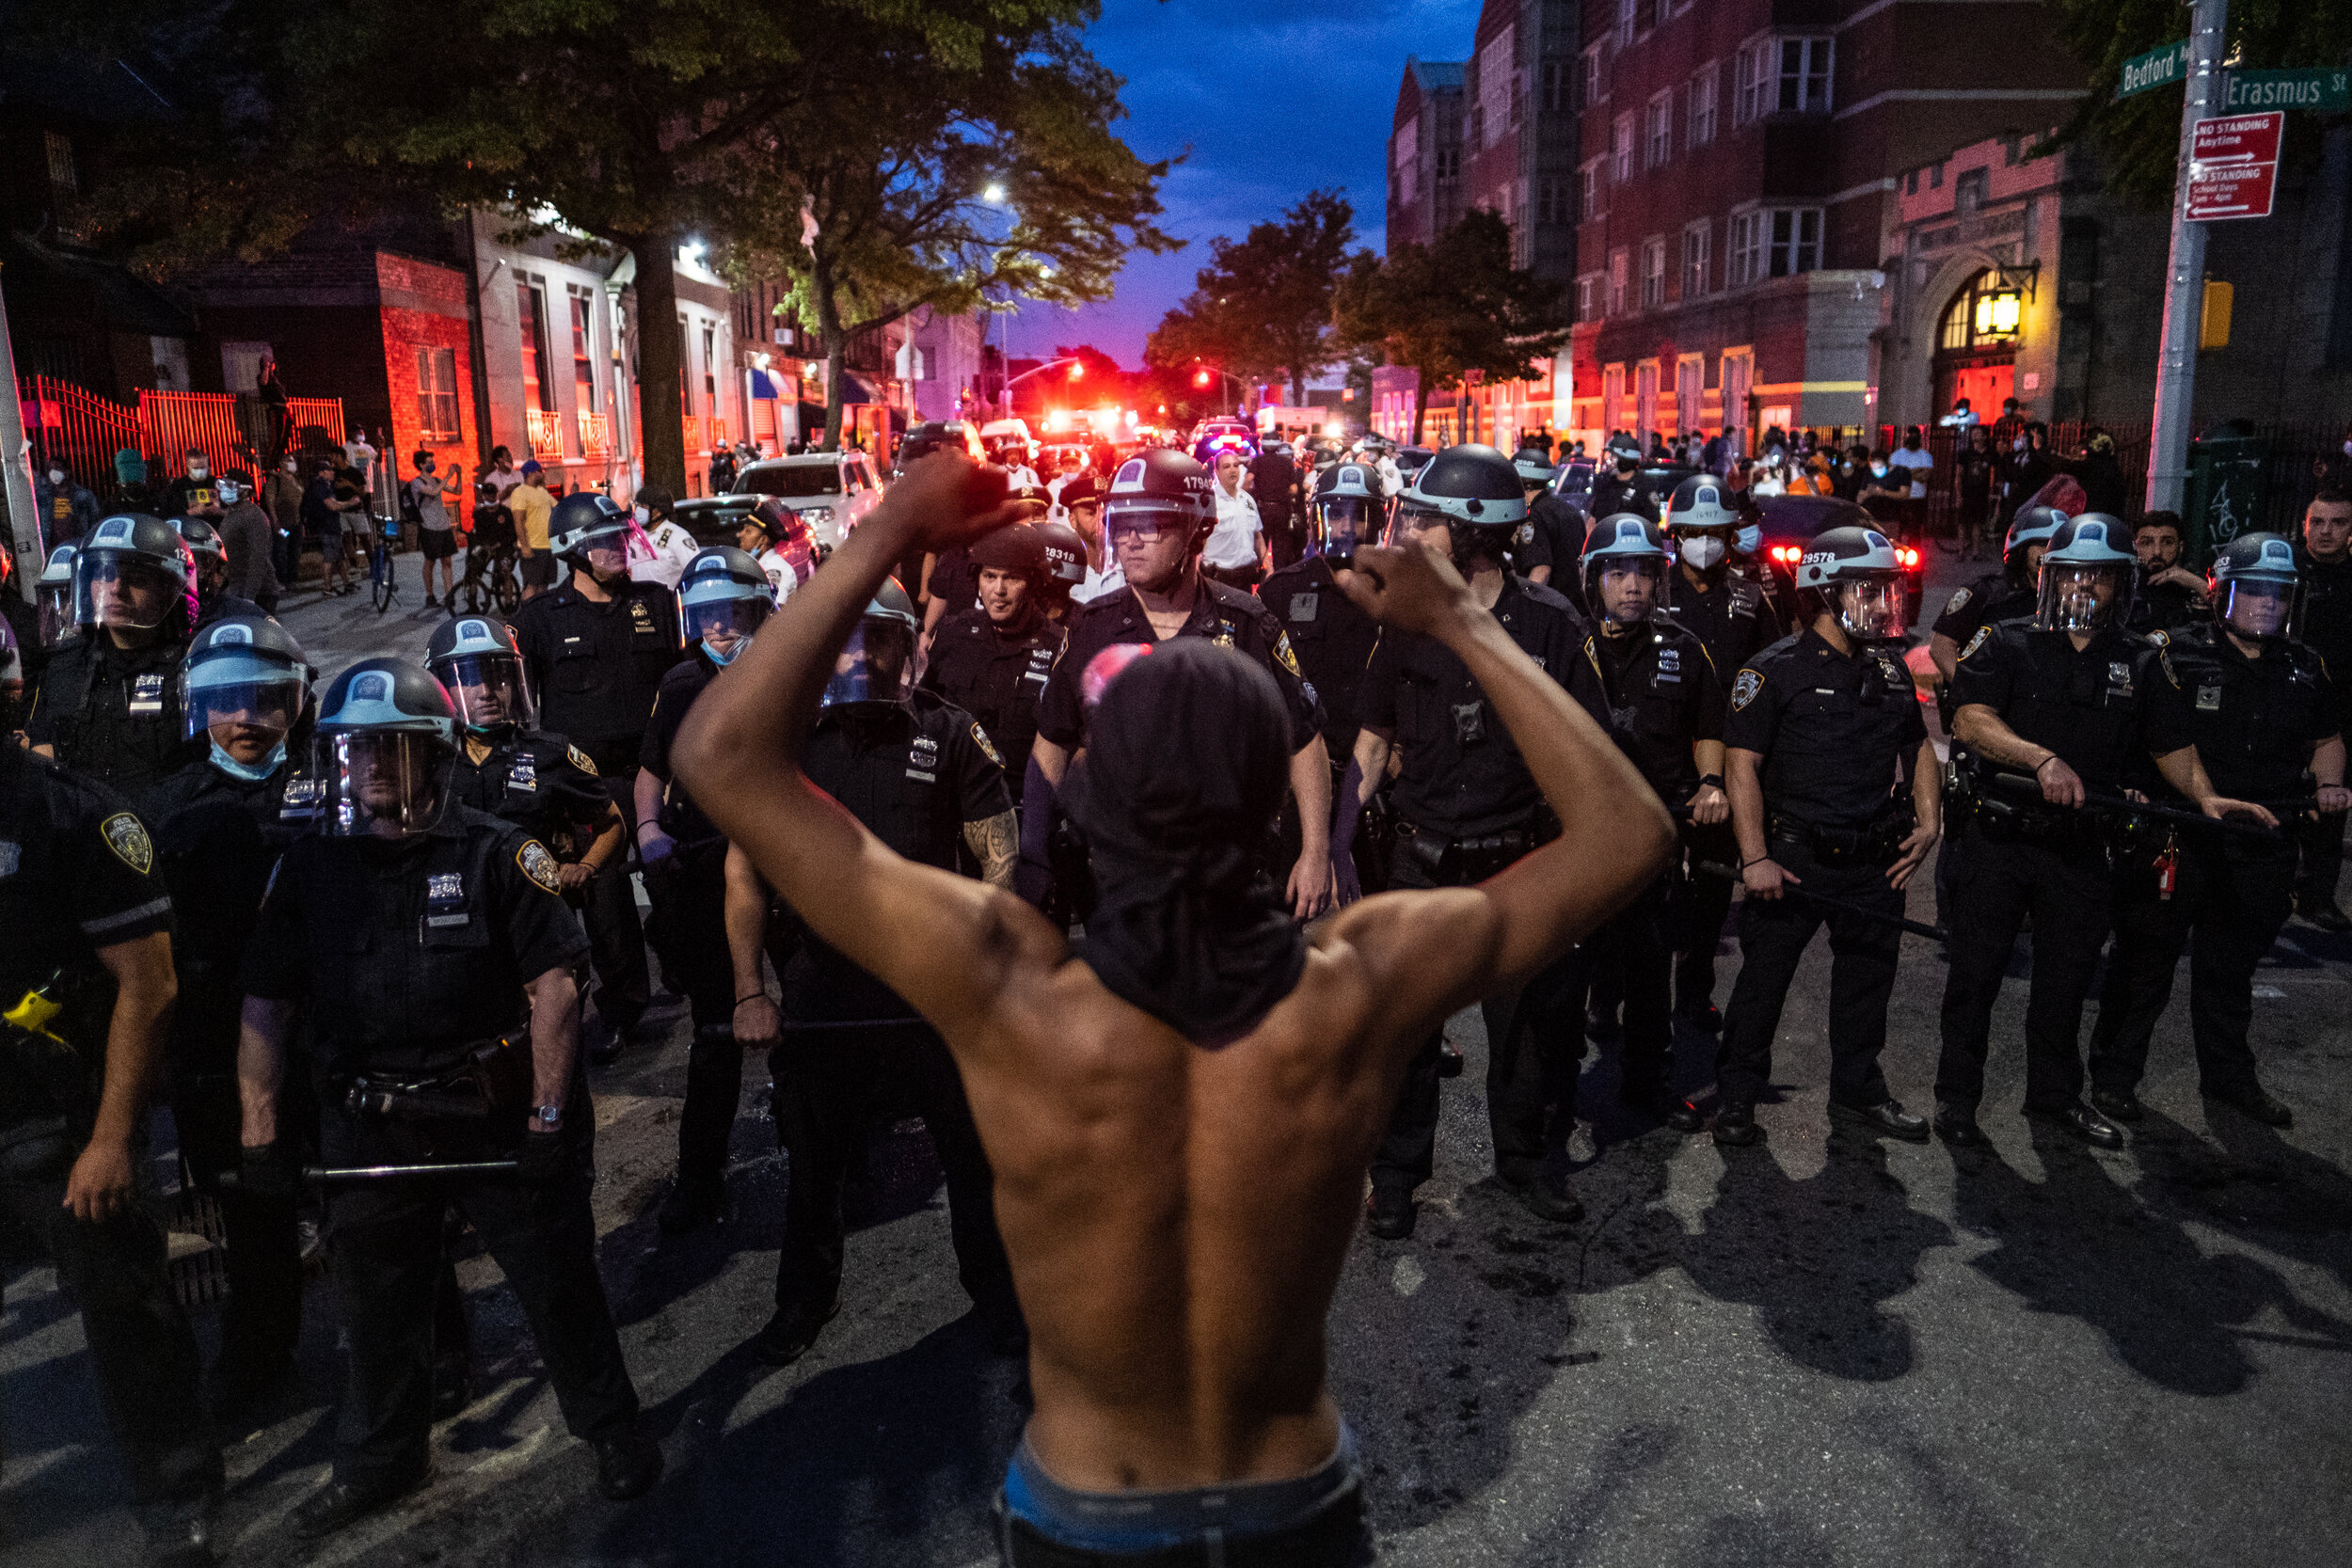  May 30, 2020: New York, NY -   Protesters clash with NYPD officers  in Flatbush, Brooklyn after George Floyd was killed while being detained by Minneapolis police on May 25.  